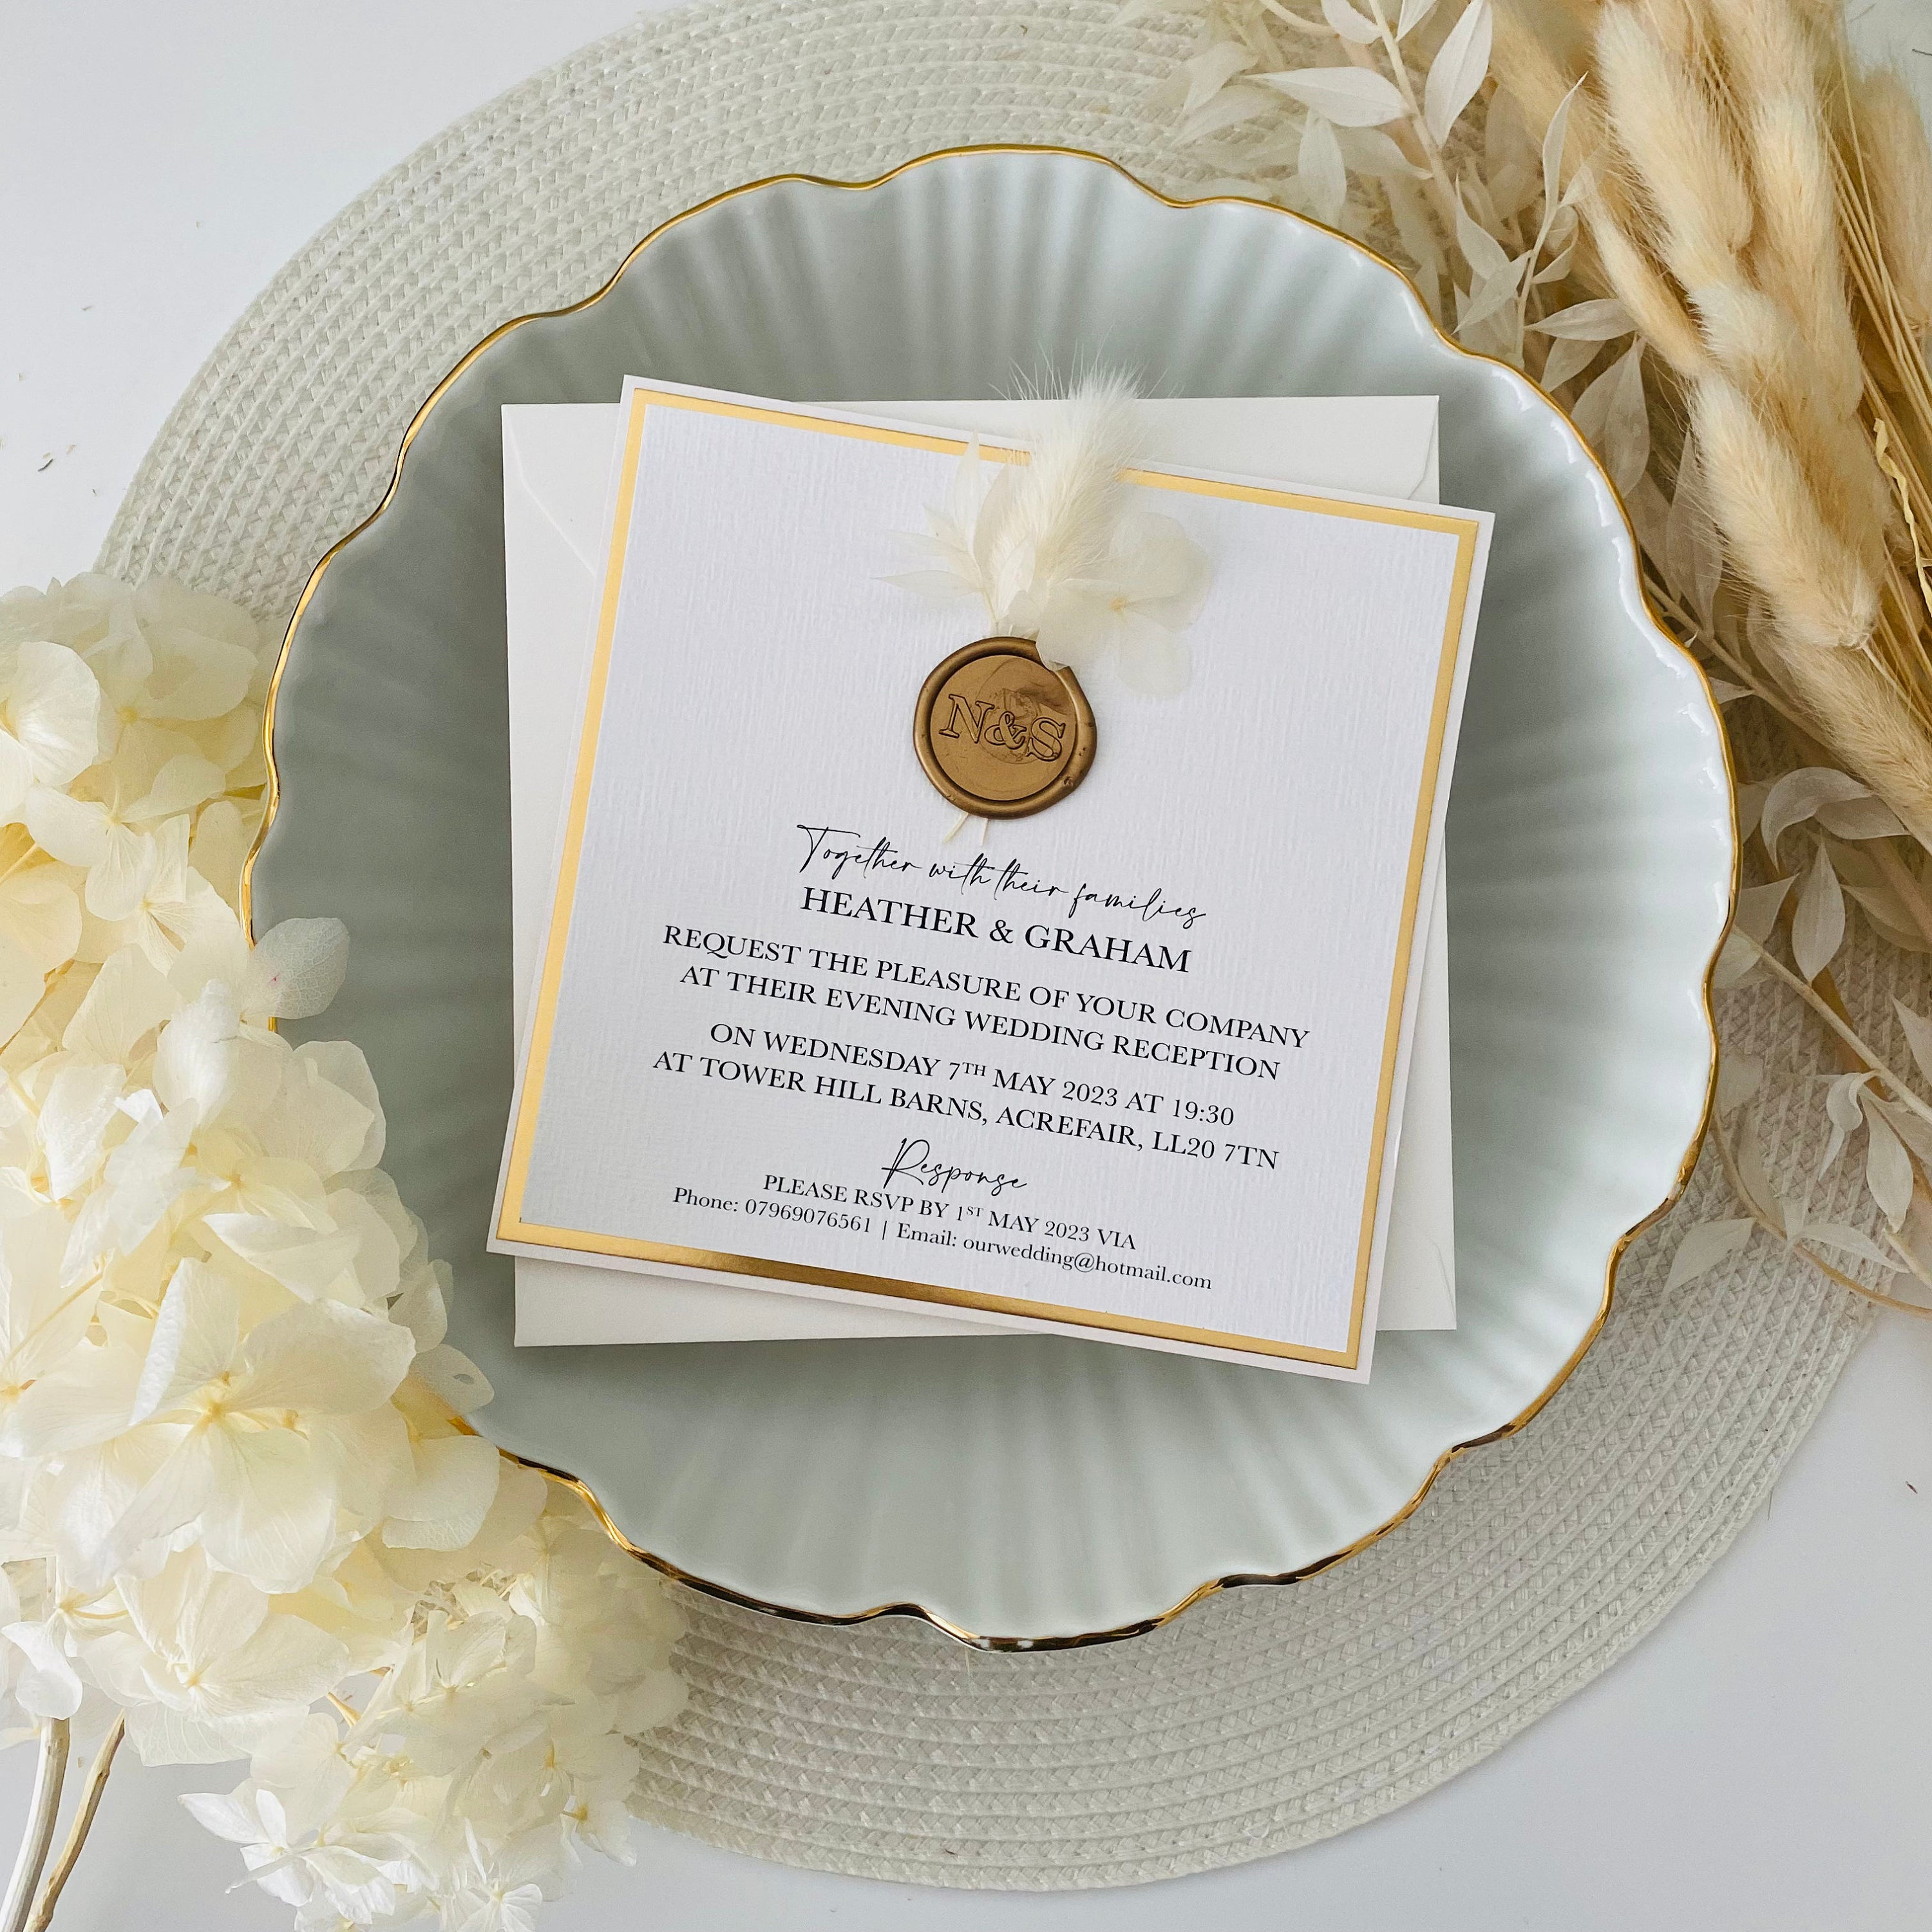 Ivory Shimmer & Textured Card Dried Flower Wax Seal Evening Invitations